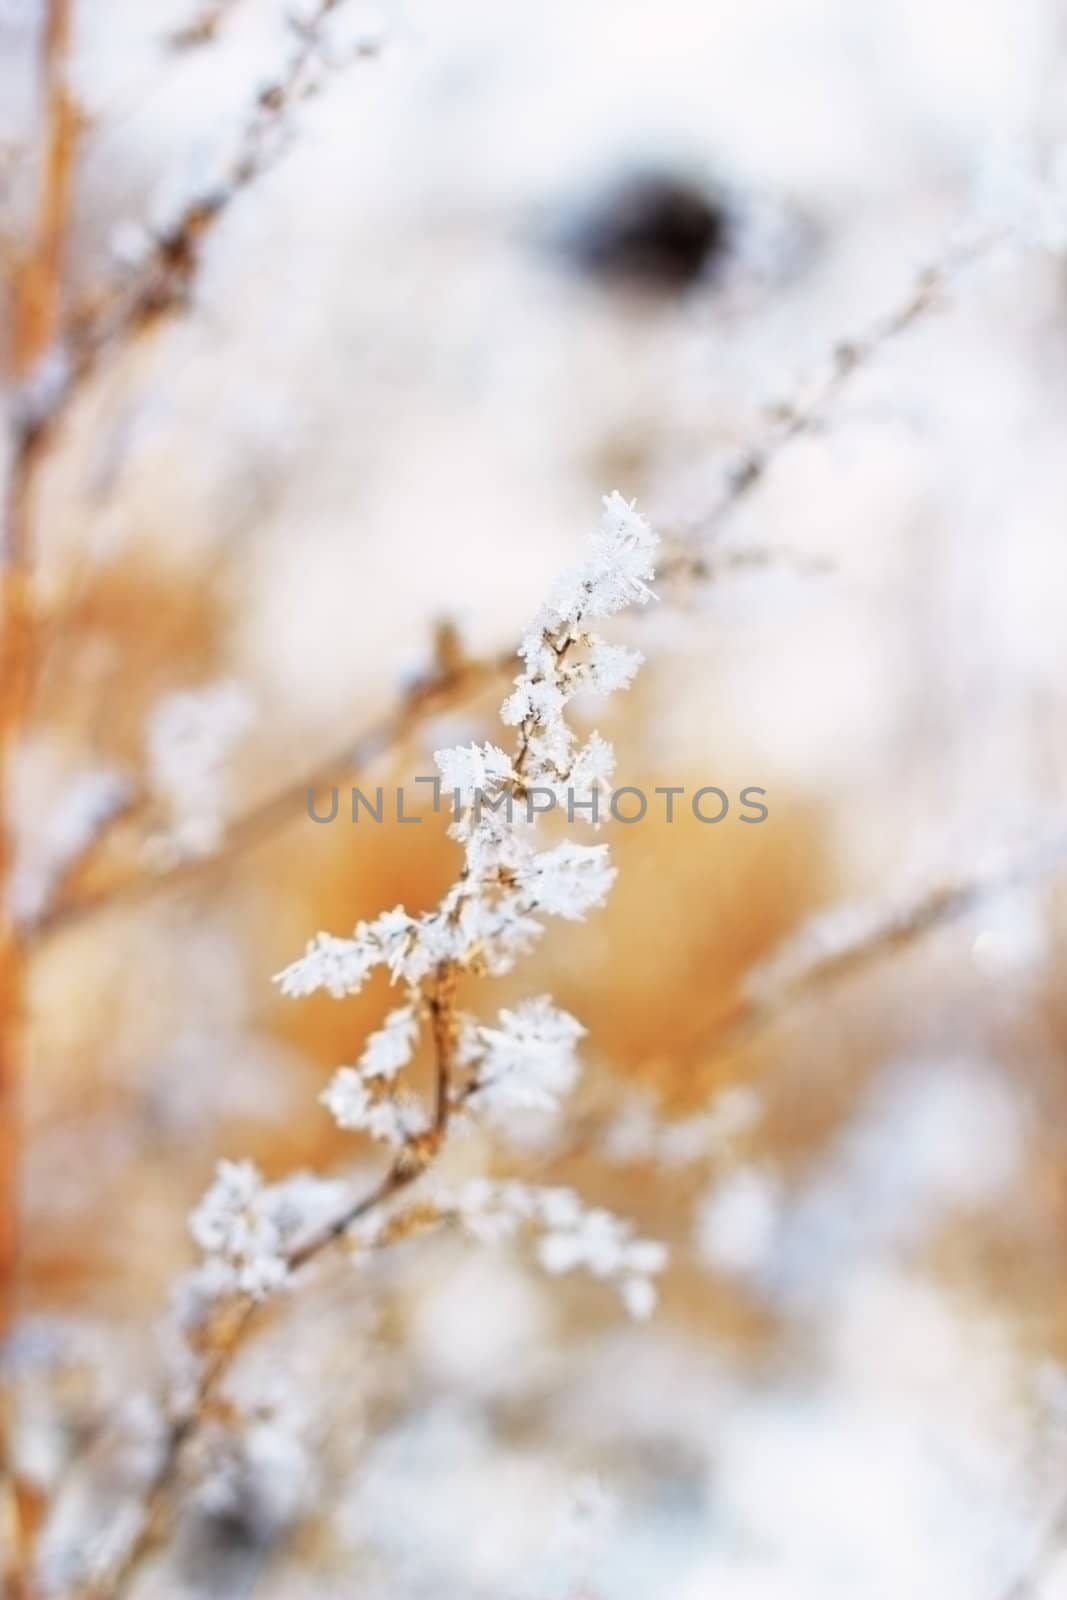 twig full of rime by taviphoto